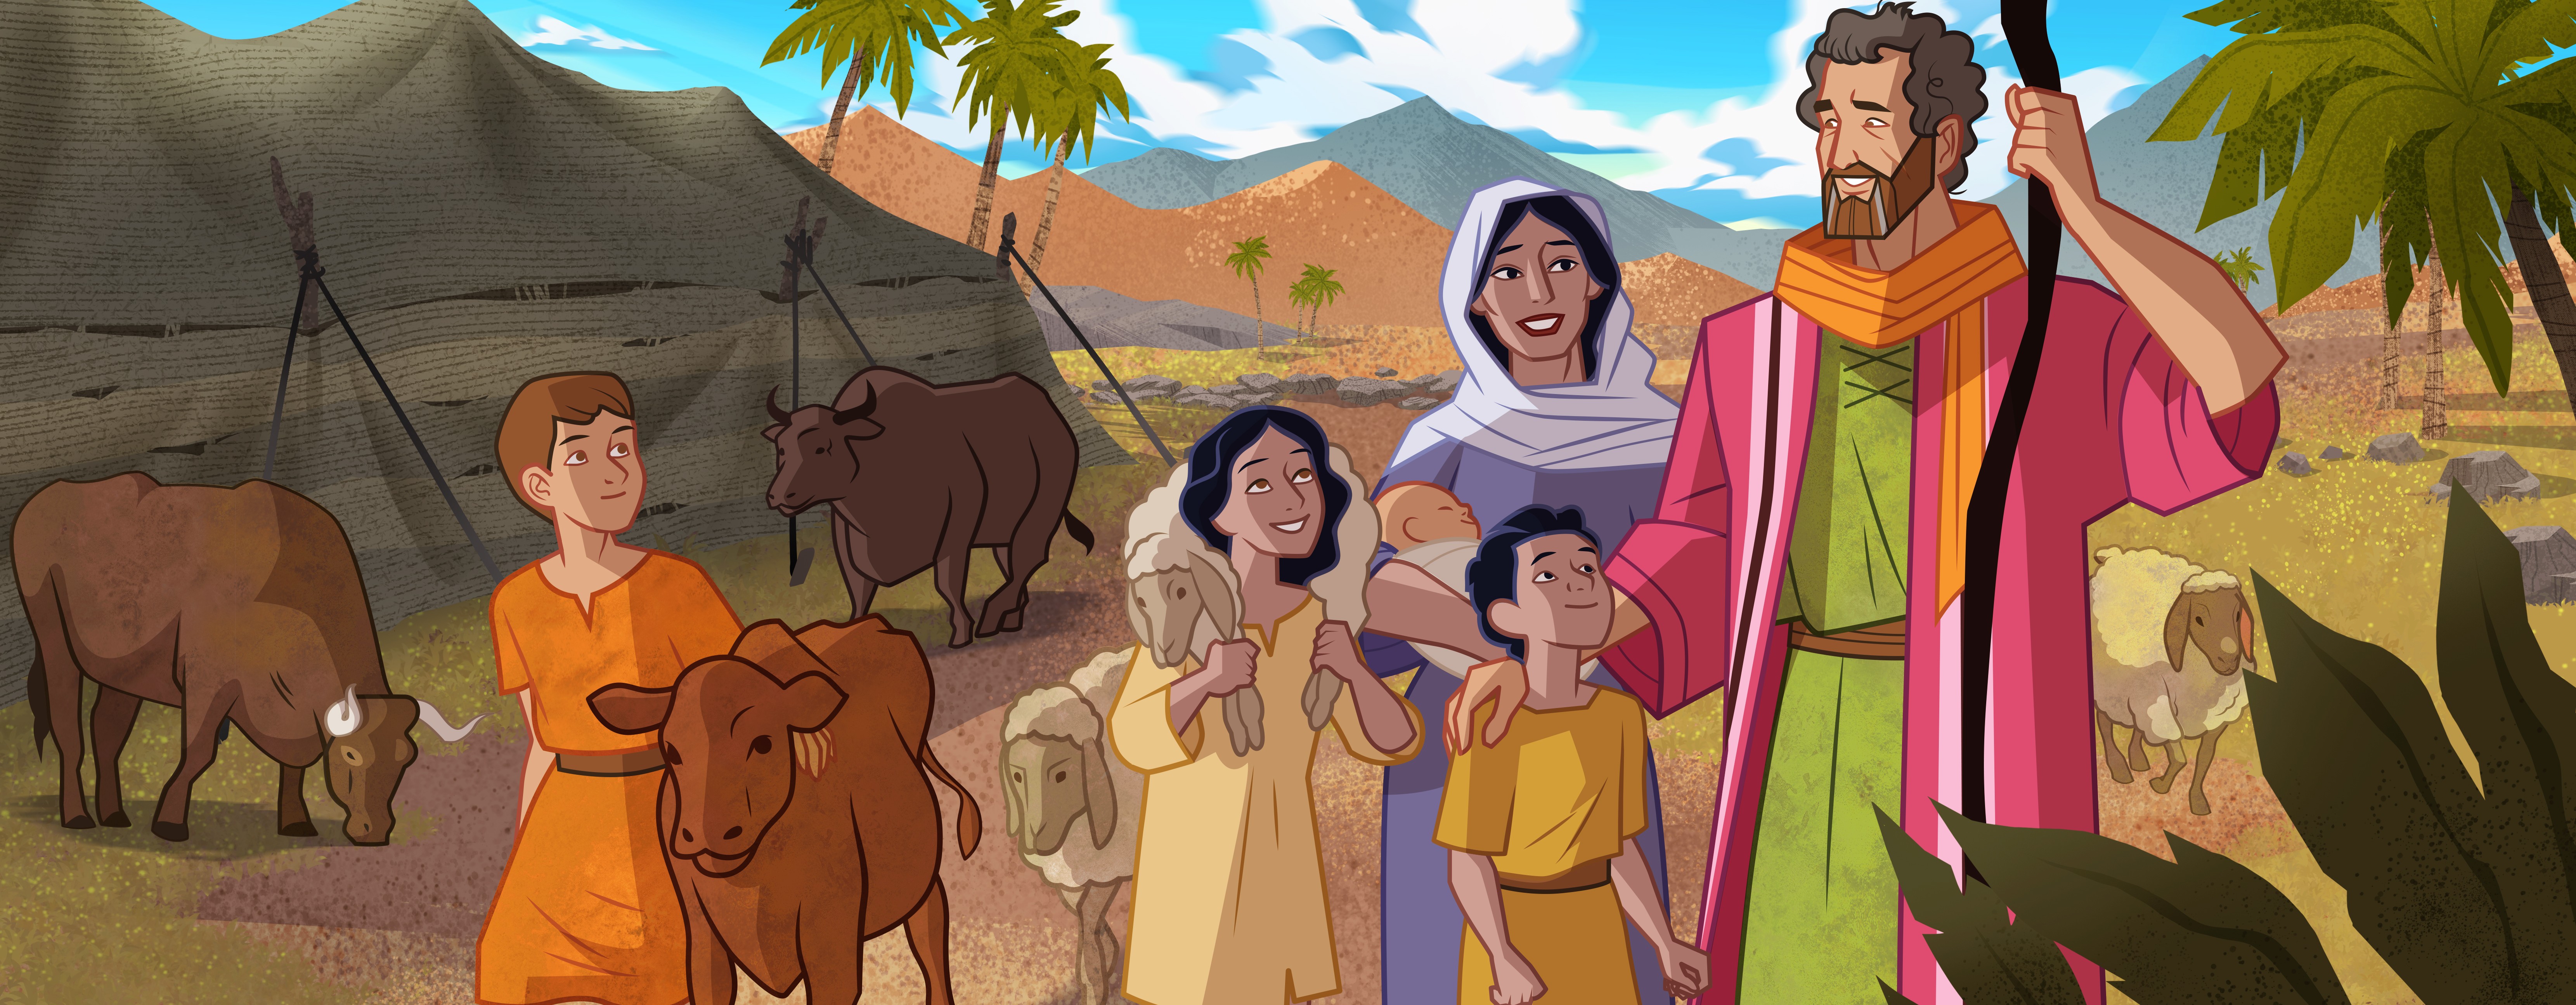 Moses and family